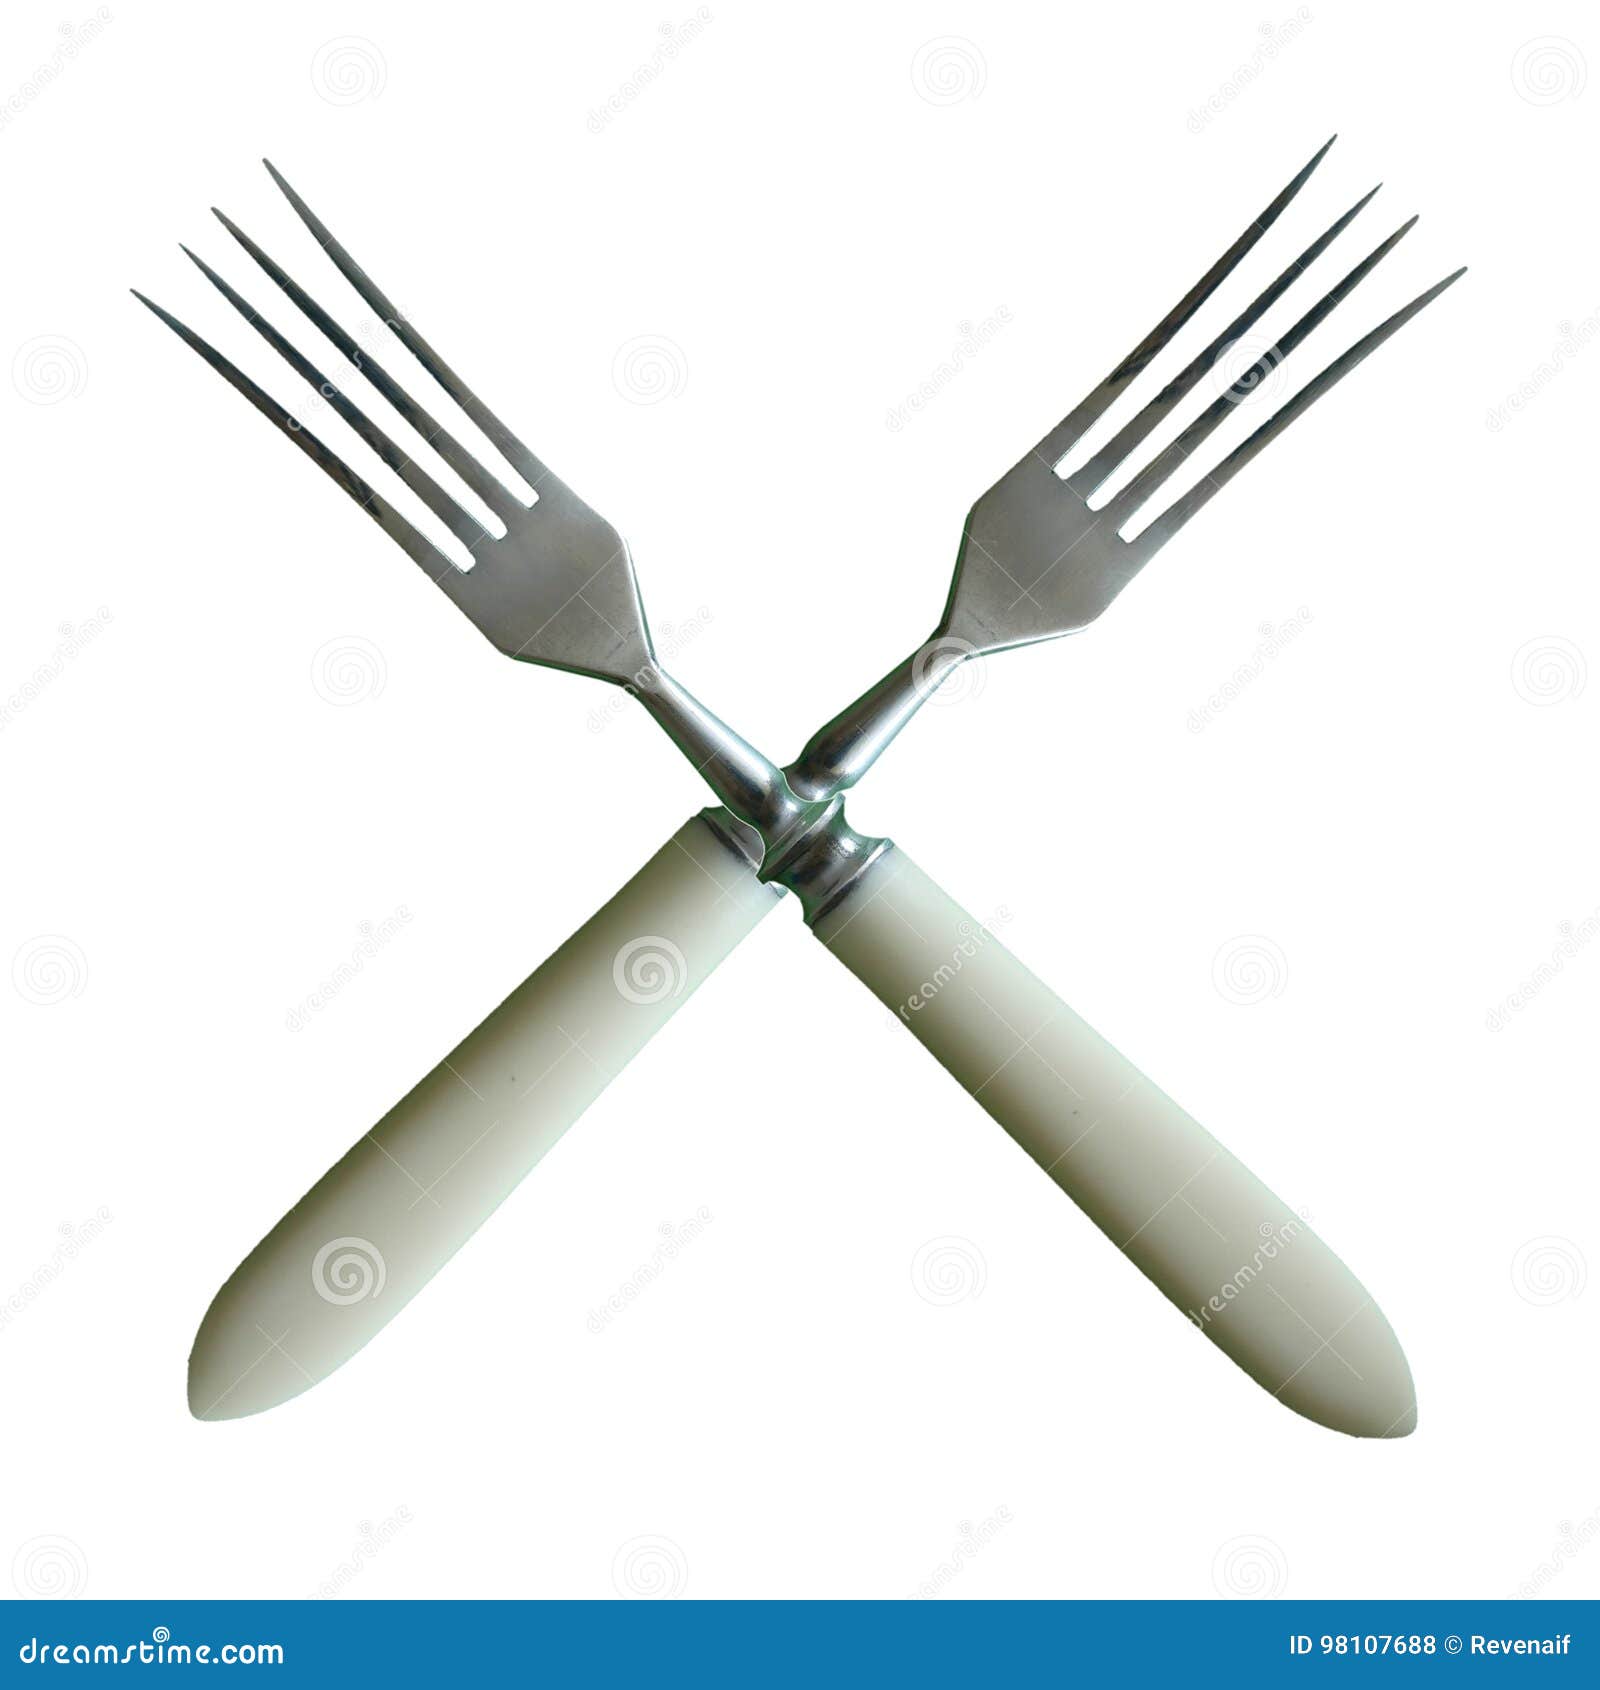 Forks Crossed Cutlery Isolated Stock Photo Image Of Metal Crossed